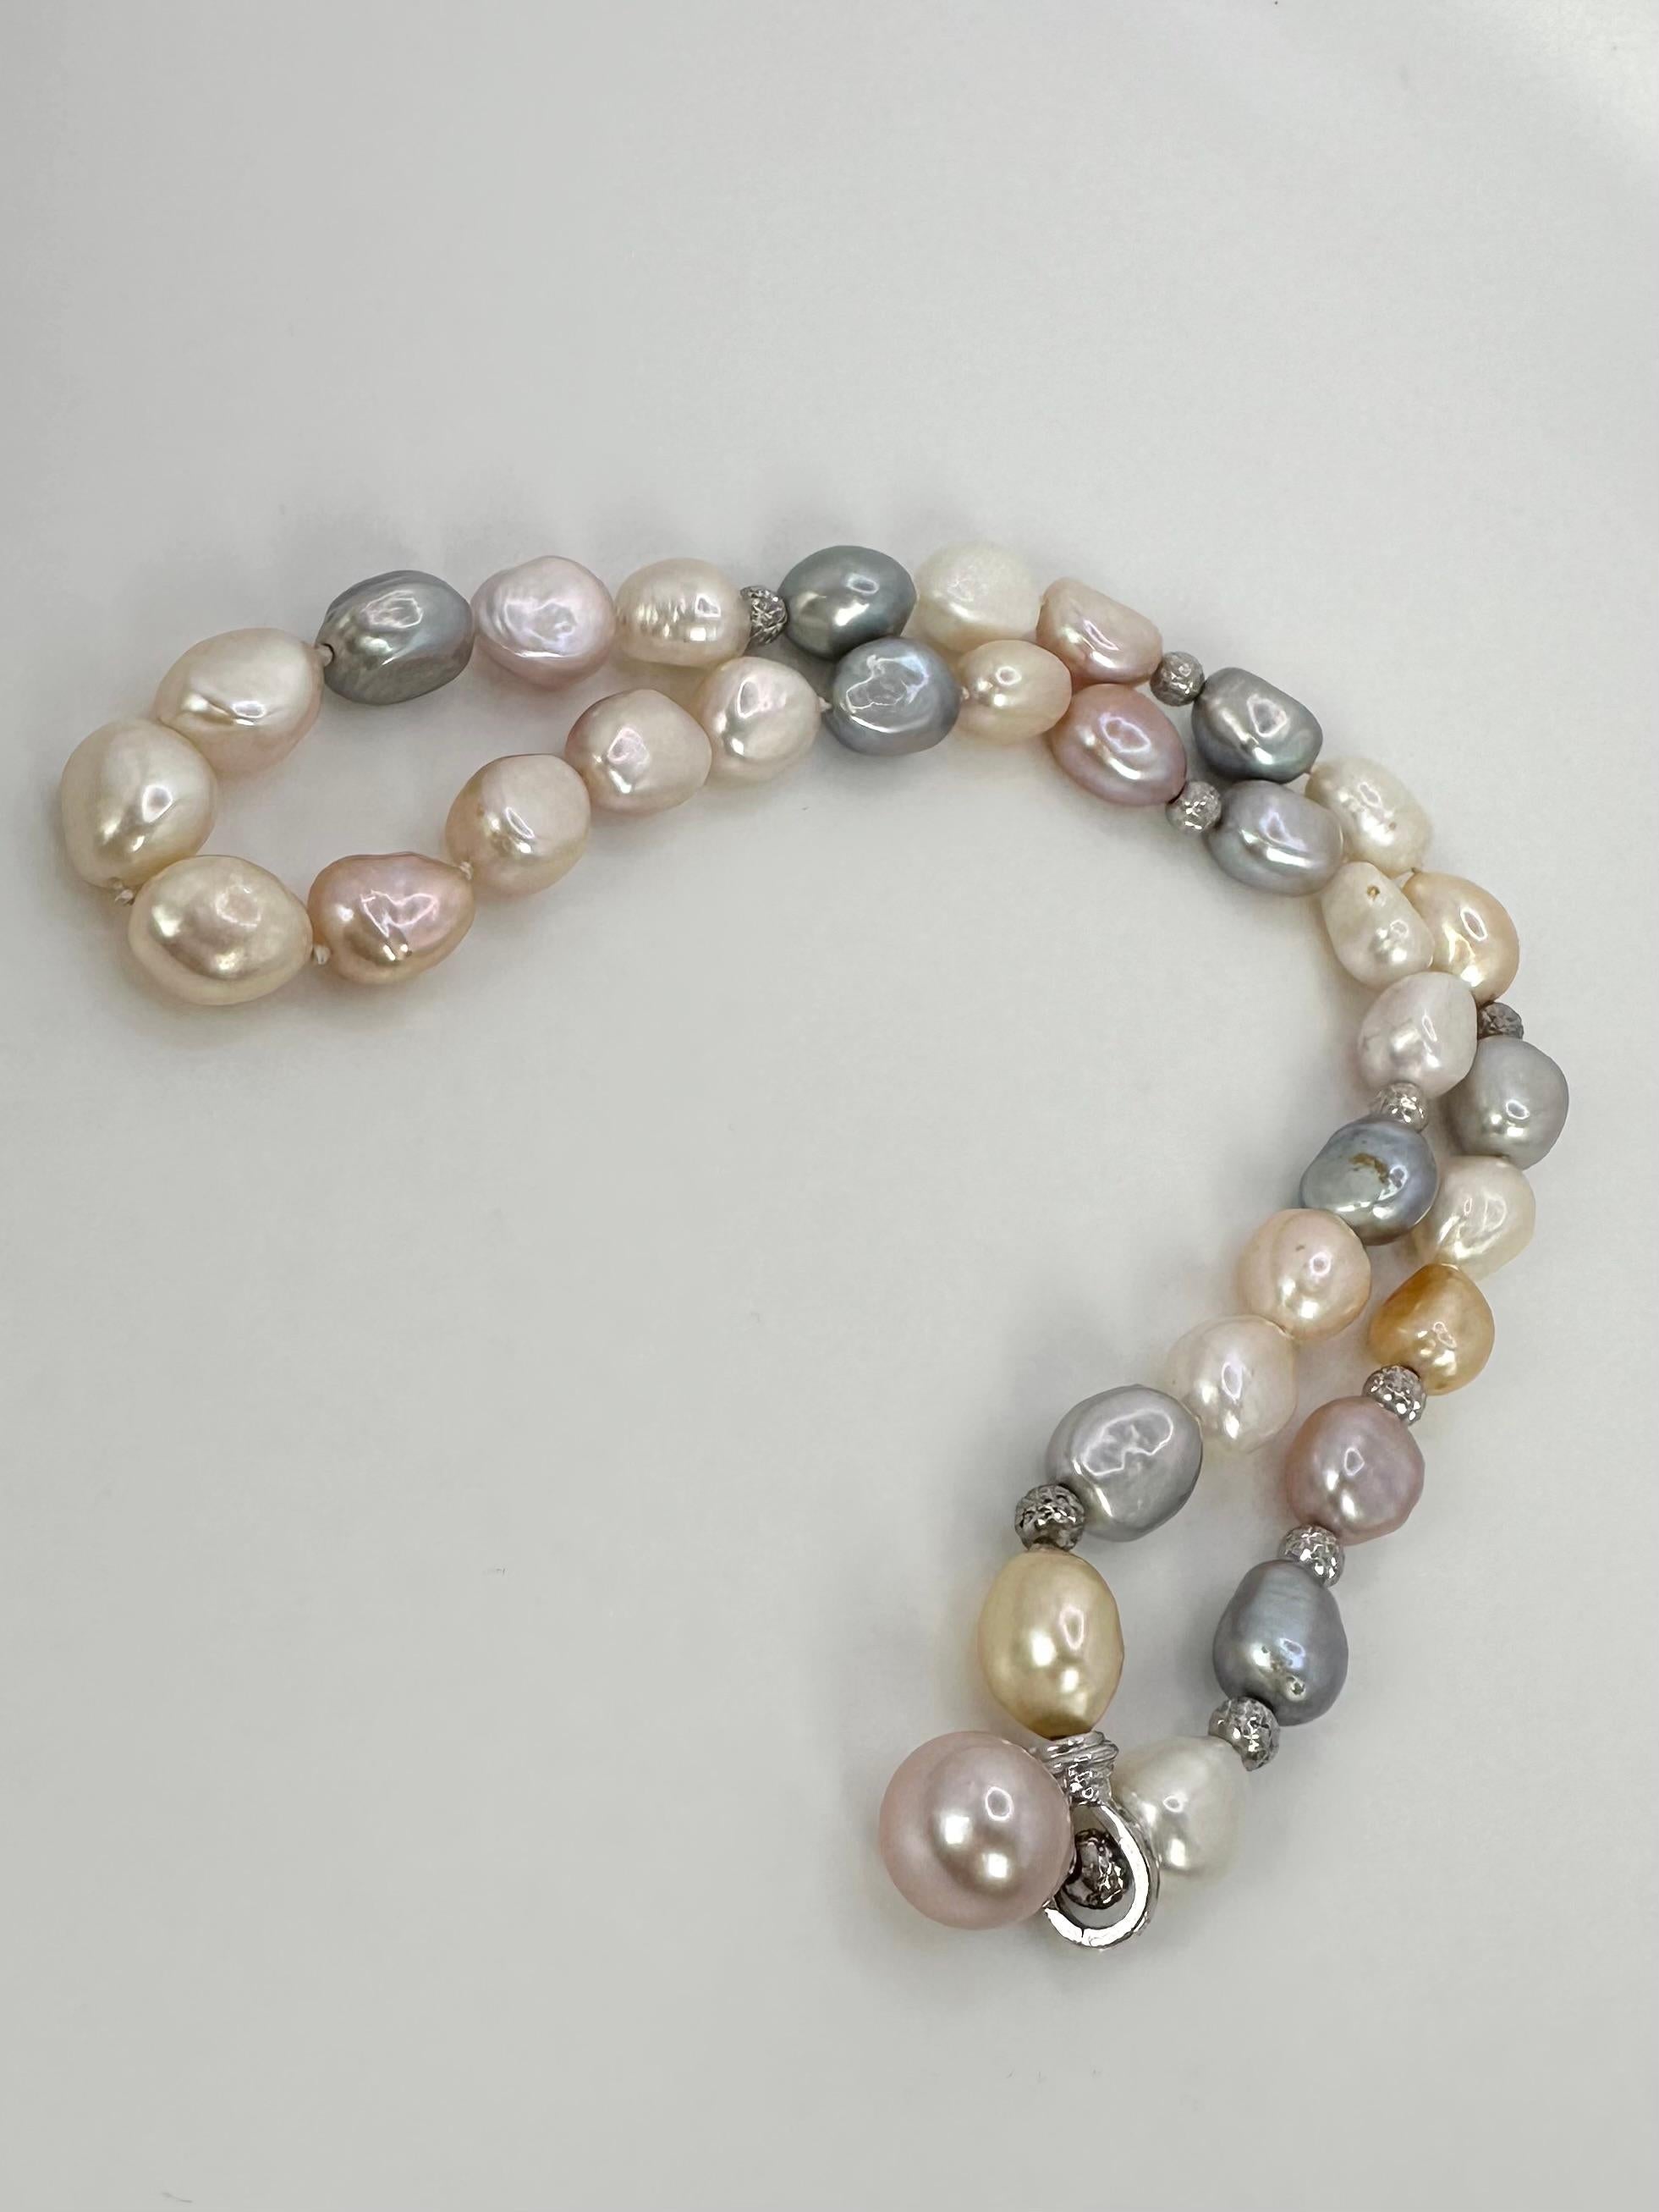 Stunning pastel color natural pearl & diamond necklace in 14KT white gold measuring 20